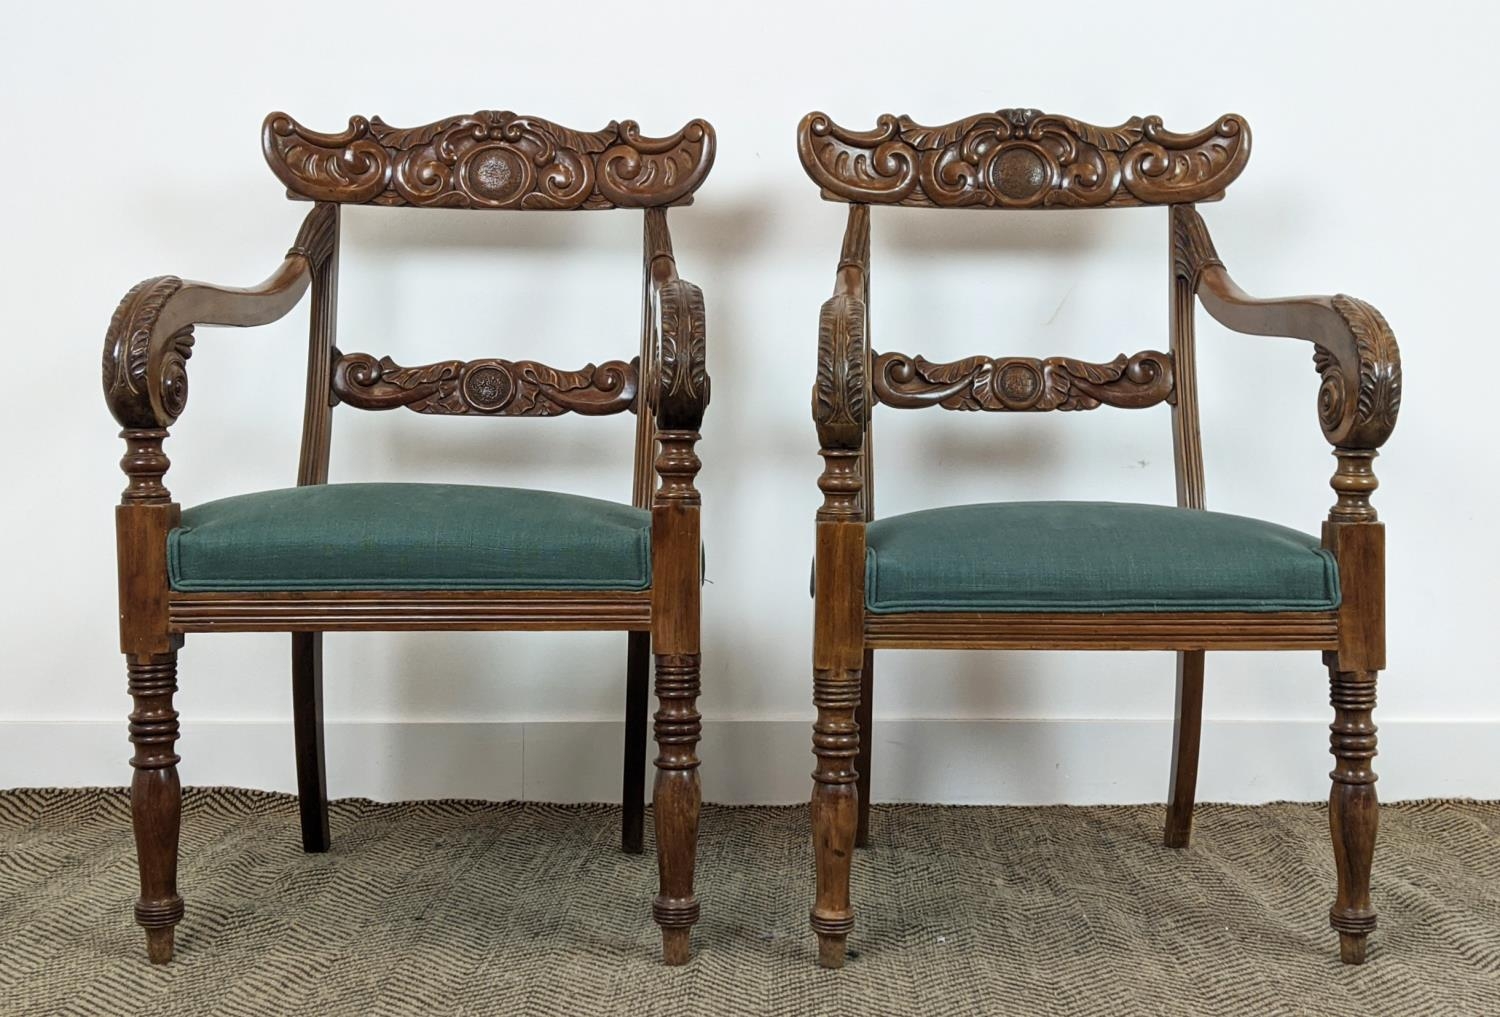 ARMCHAIRS, a pair, mid 19th century mahogany with green stuffover seats, 91cm H x 58cm x 58cm. (2) - Image 5 of 18